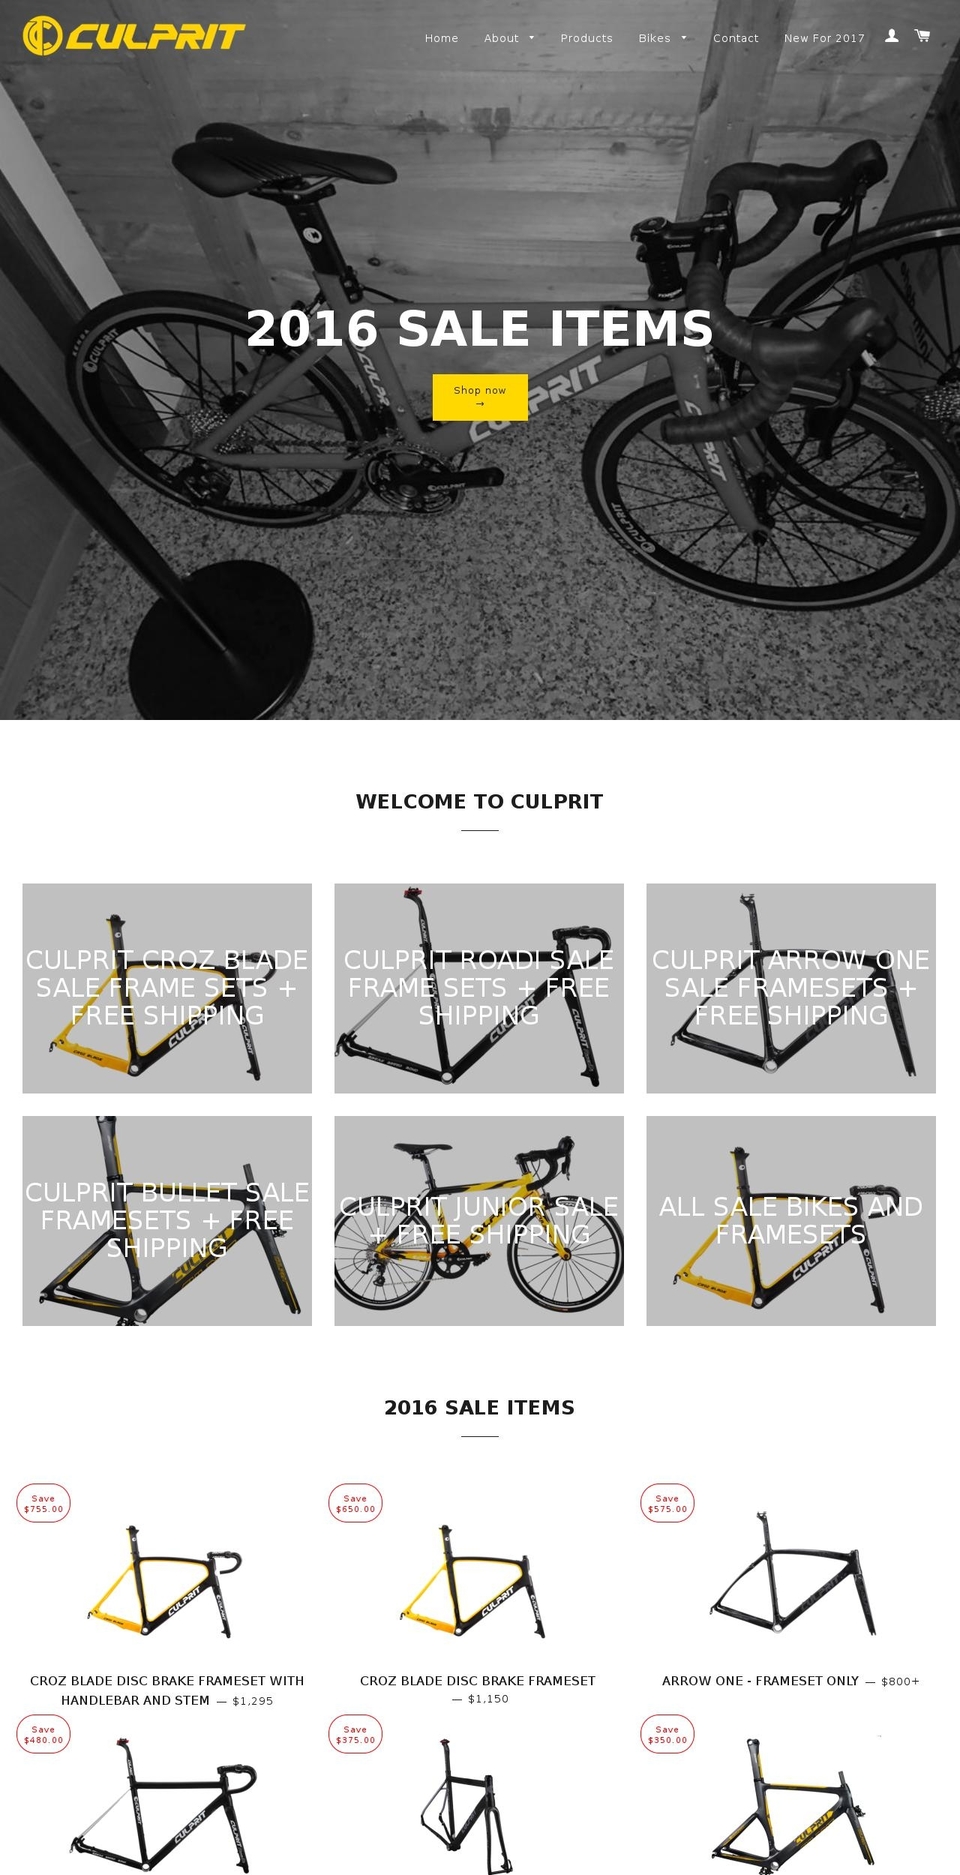 Brooklyn Shopify theme site example culpritbicycles.com